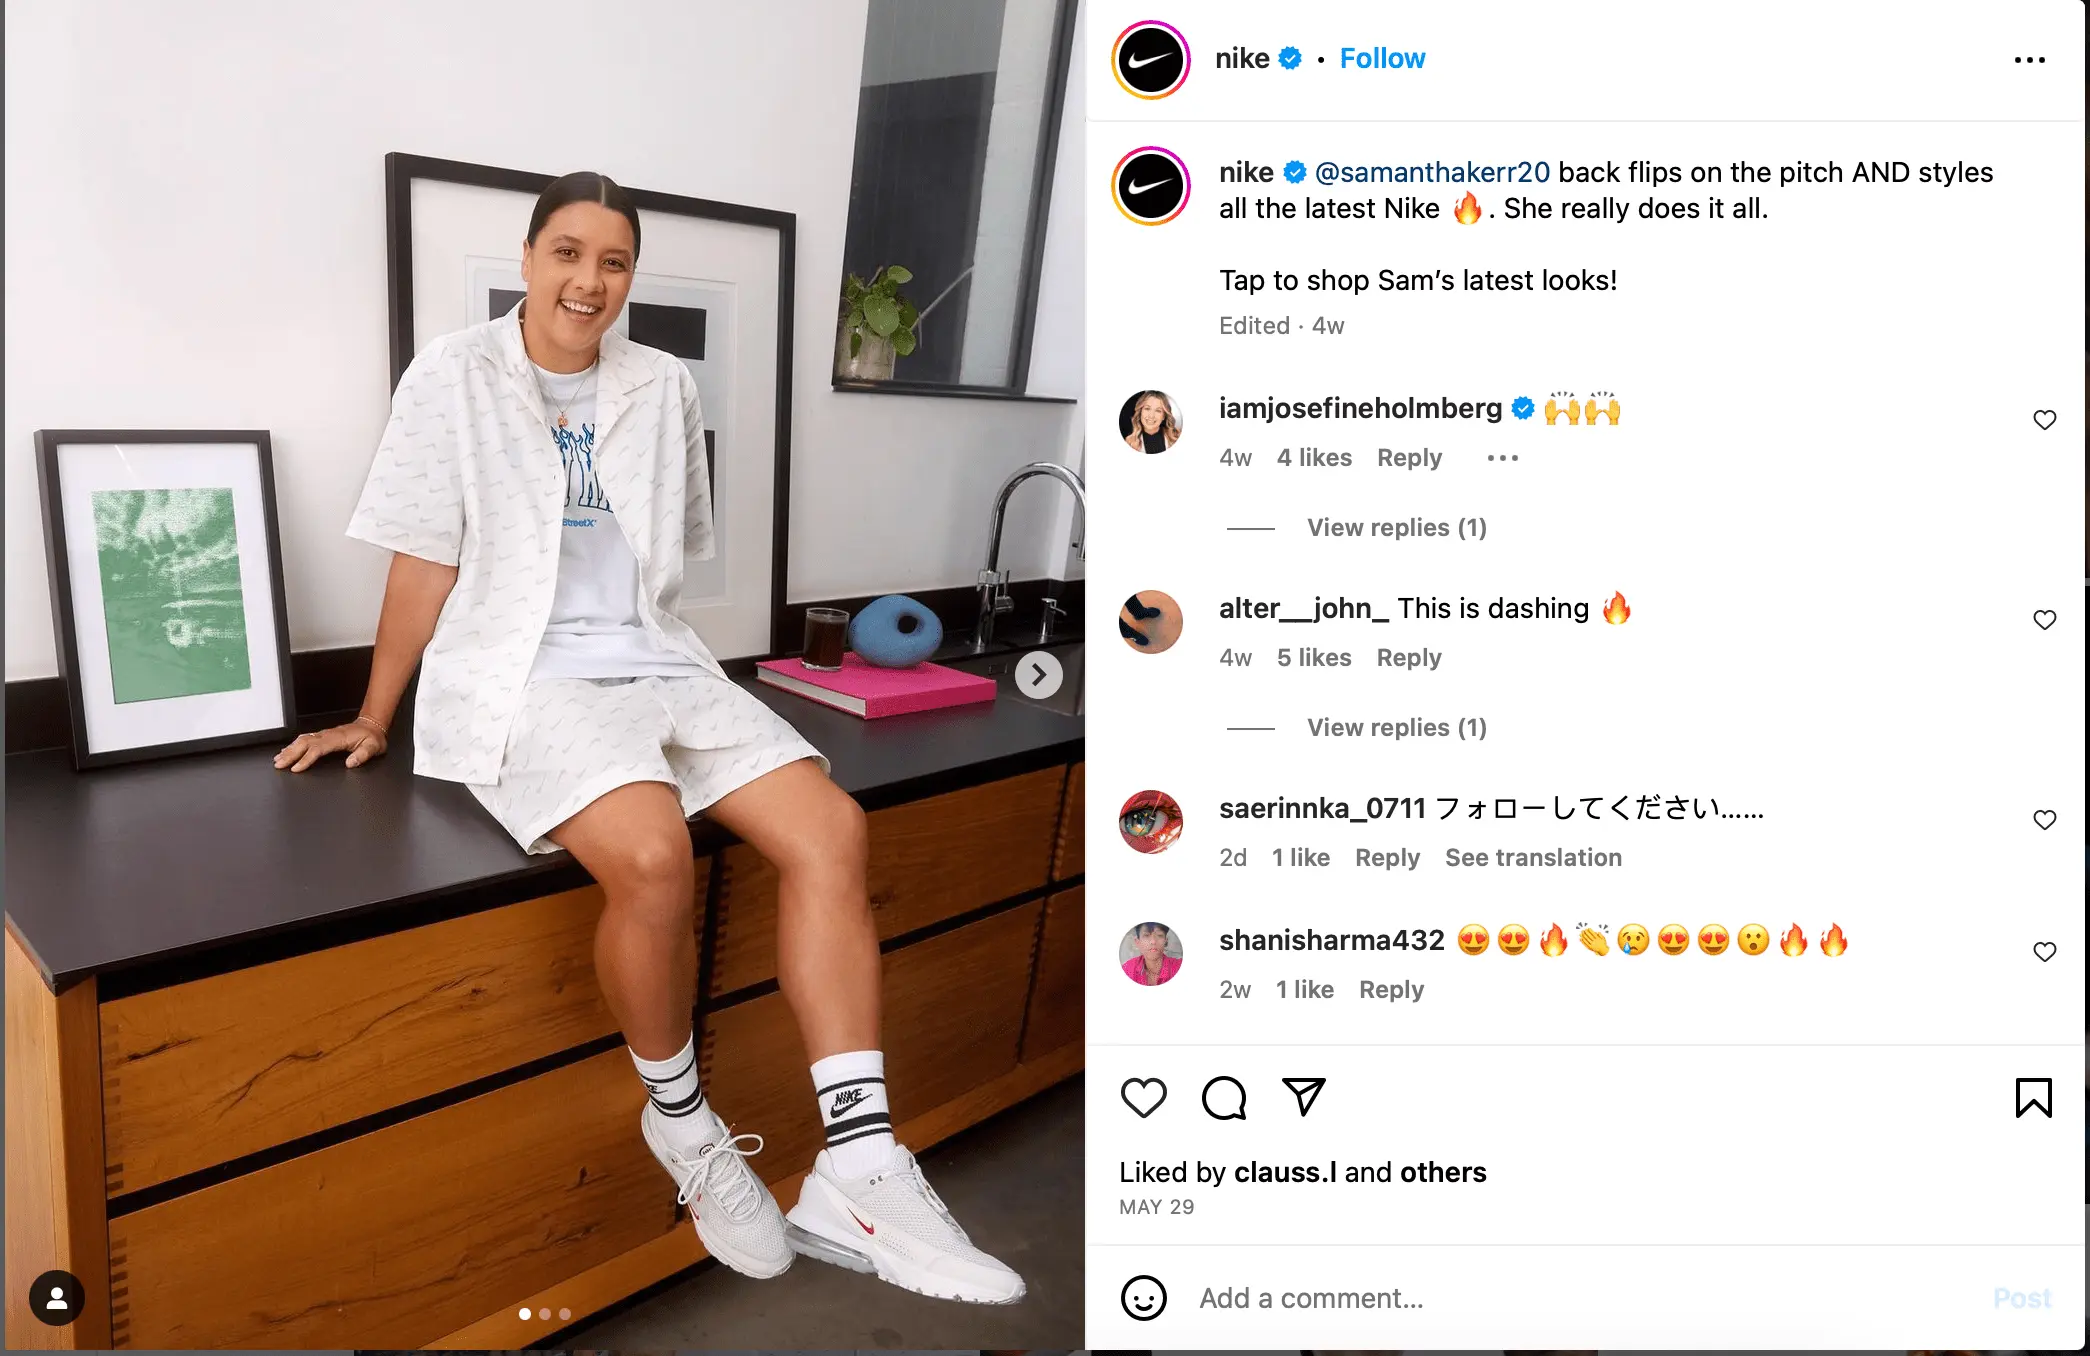 an image showing a screenshot of the nike instagram page featuring an athlete to promote their latest product